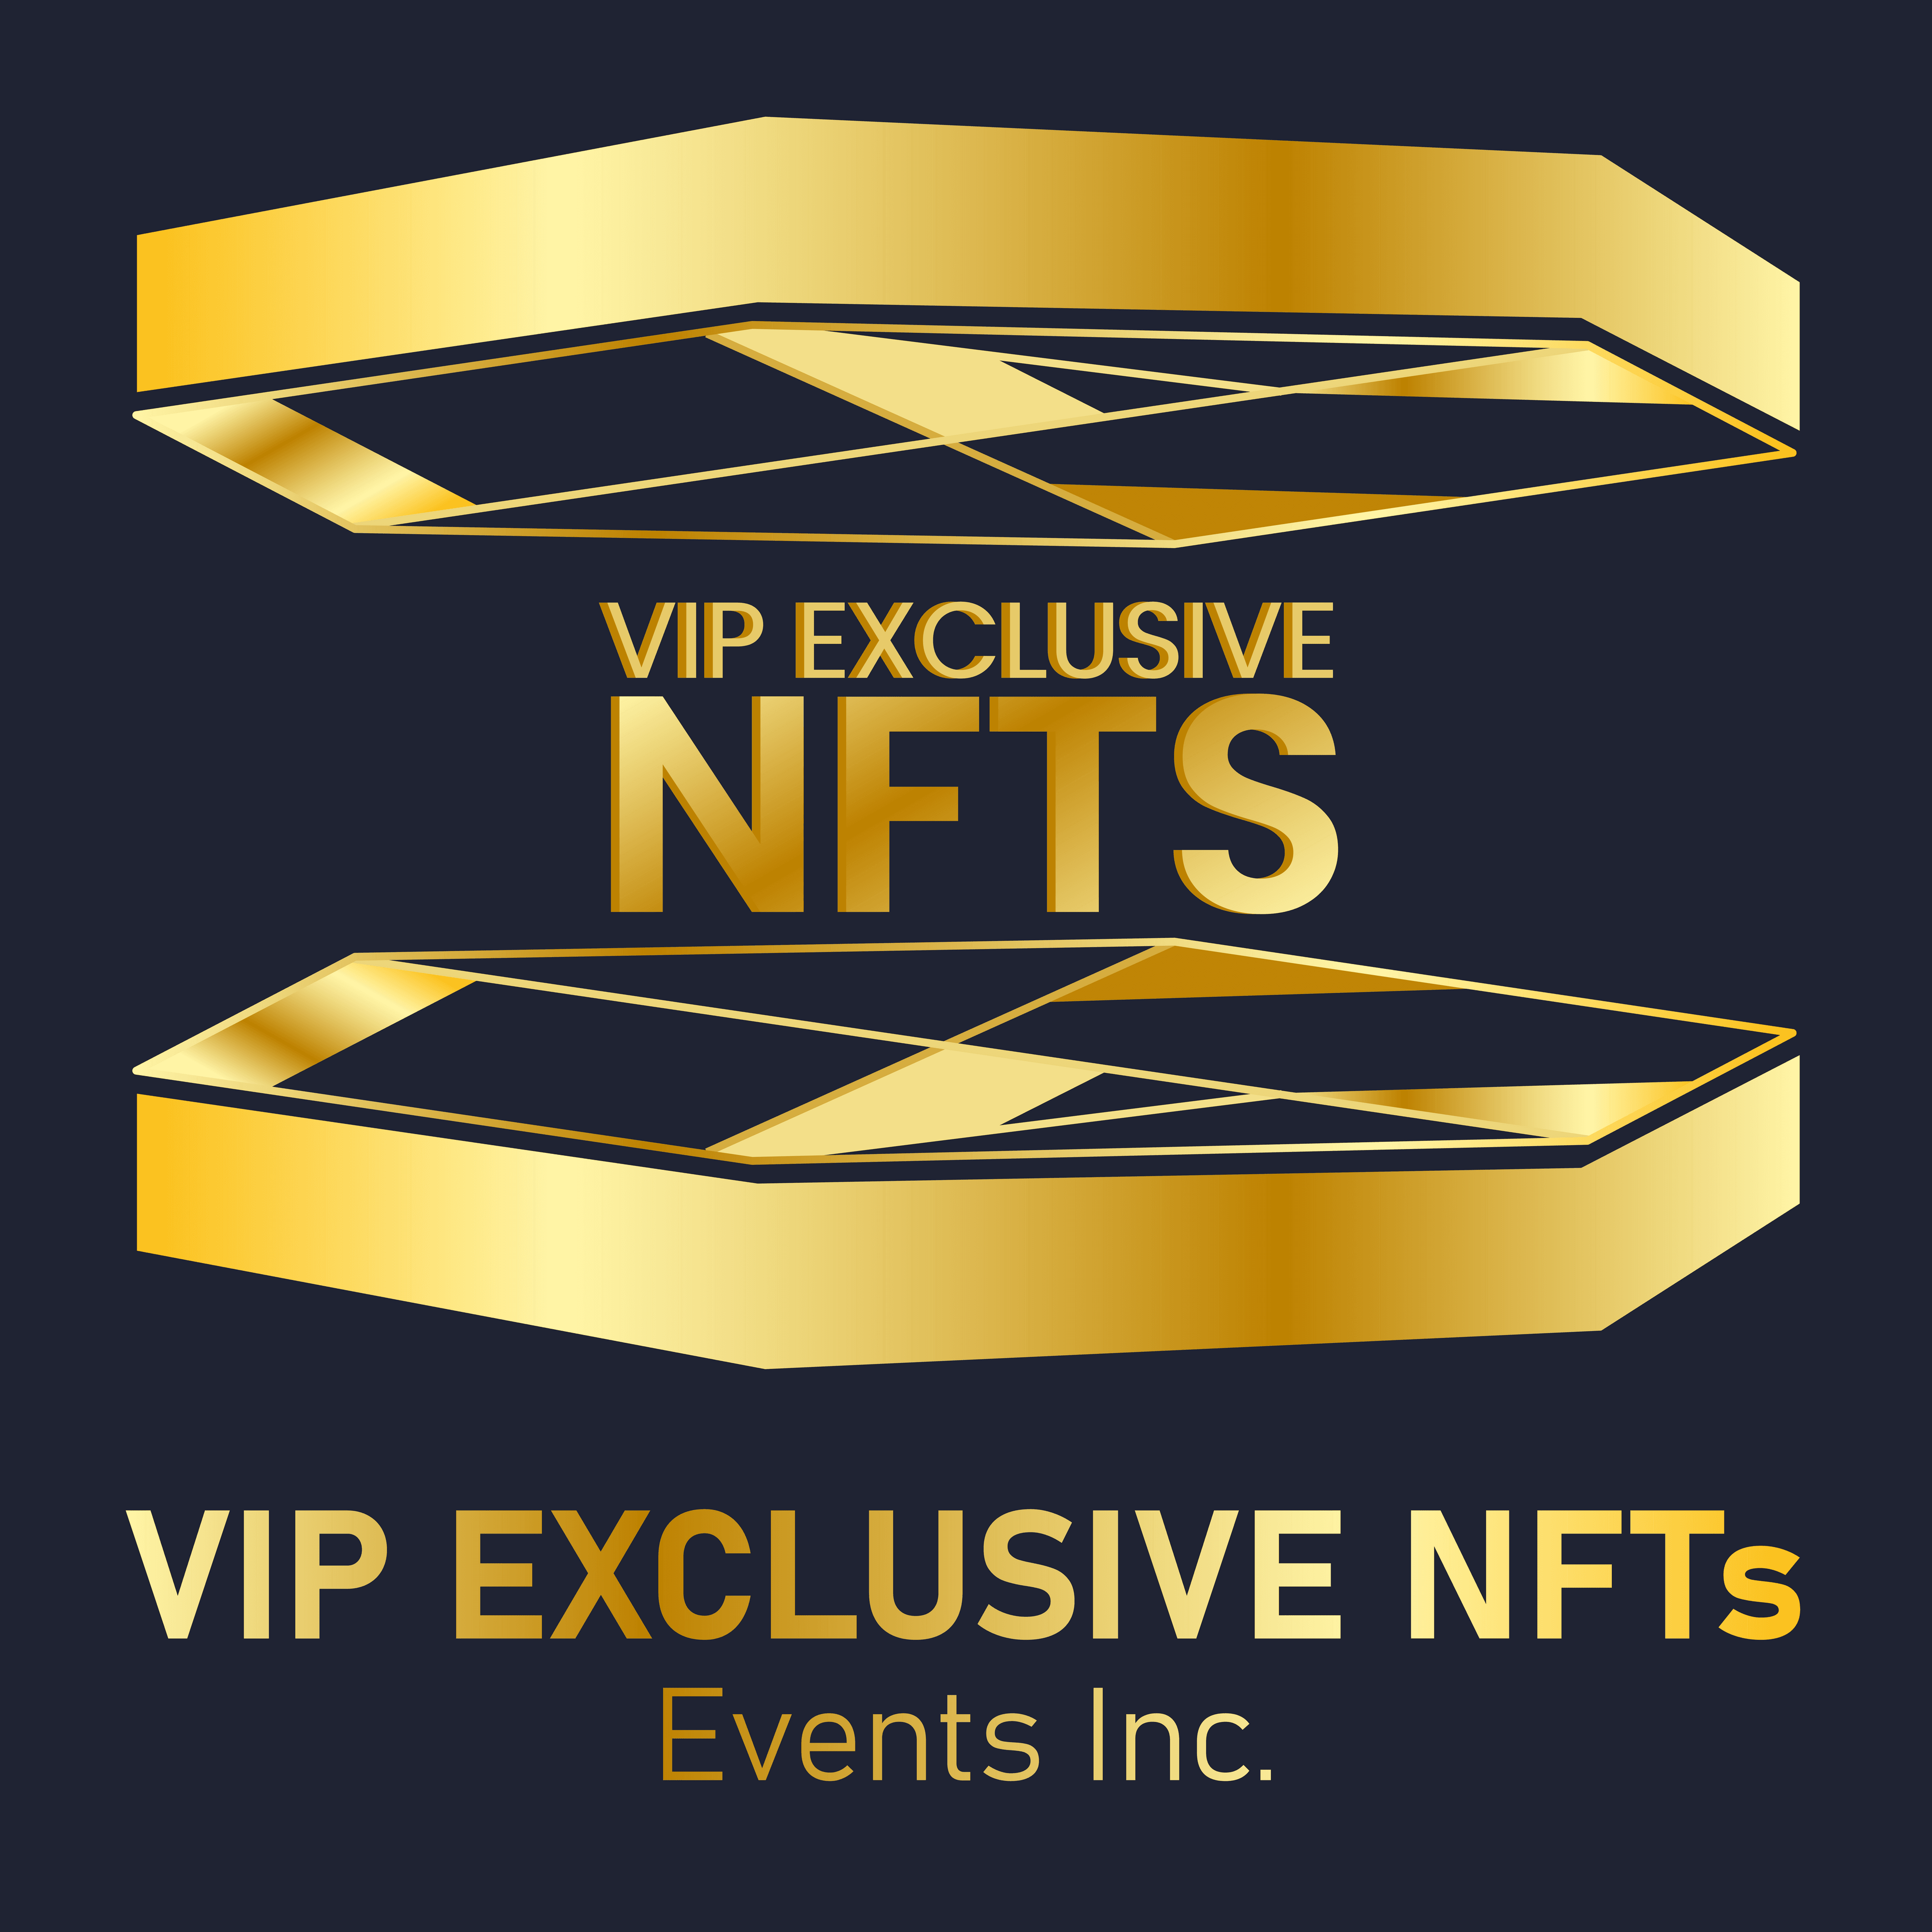 VIP EXCLUSIVE NFTs EVENTS ACCESS PASS